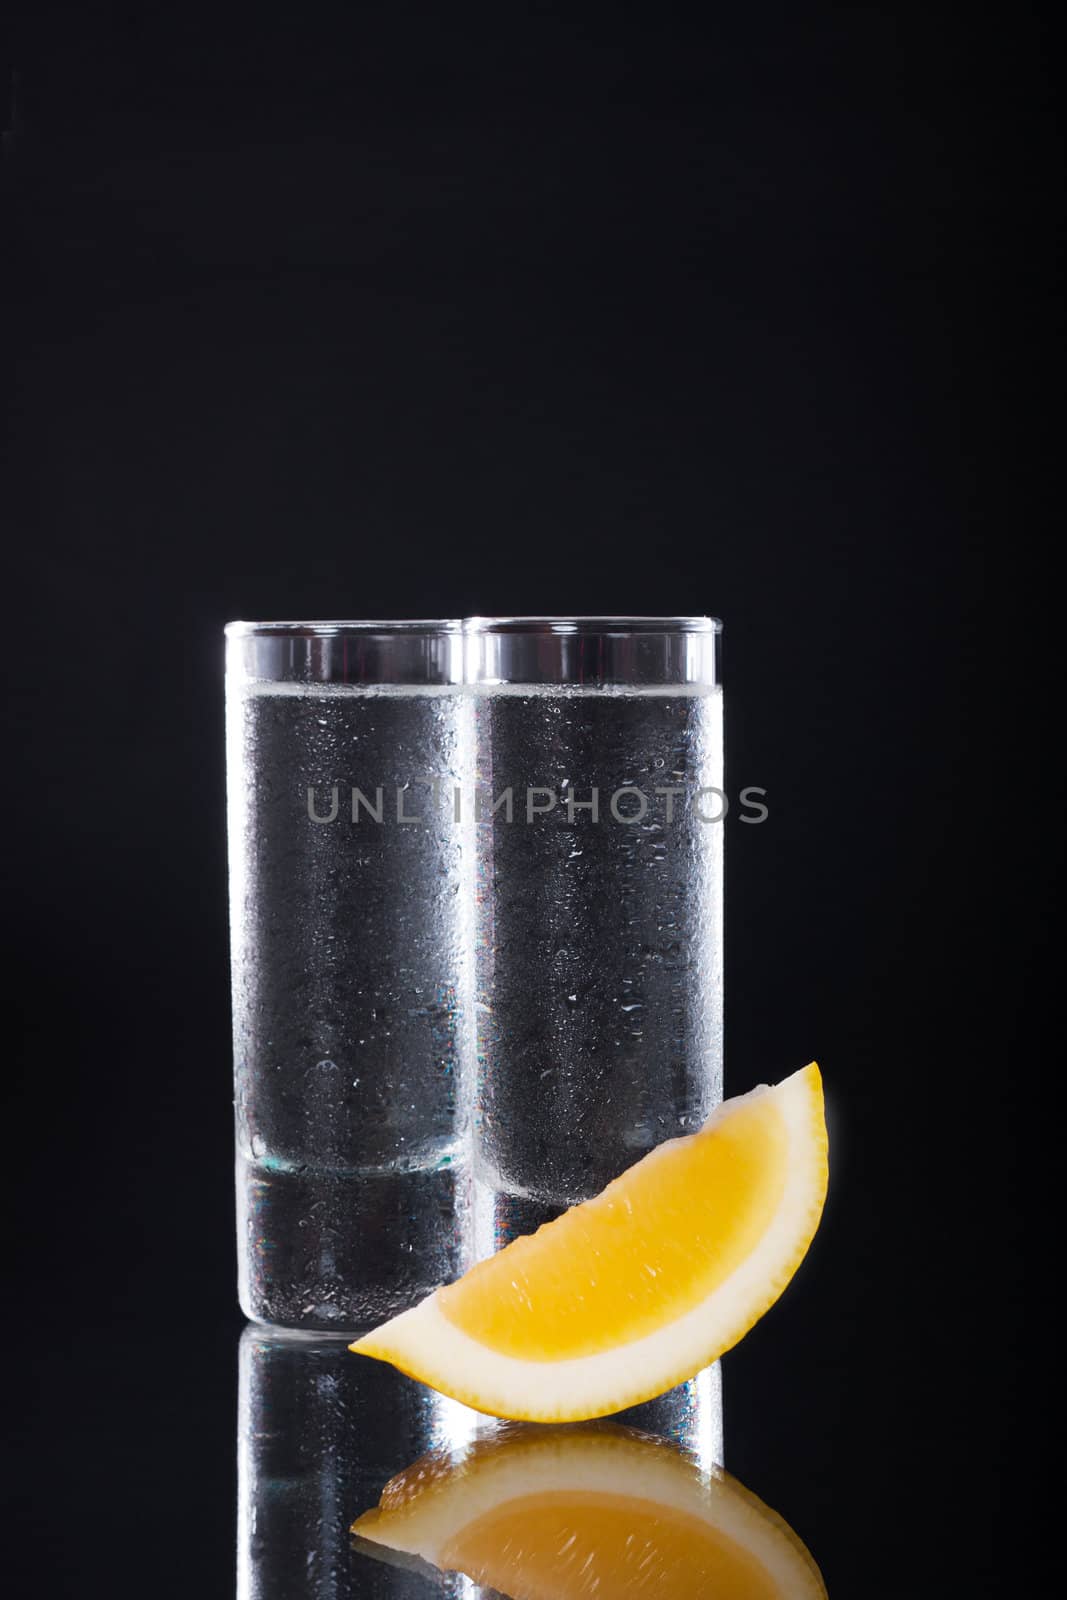 Shot glass filled with clear alcohol on a black background